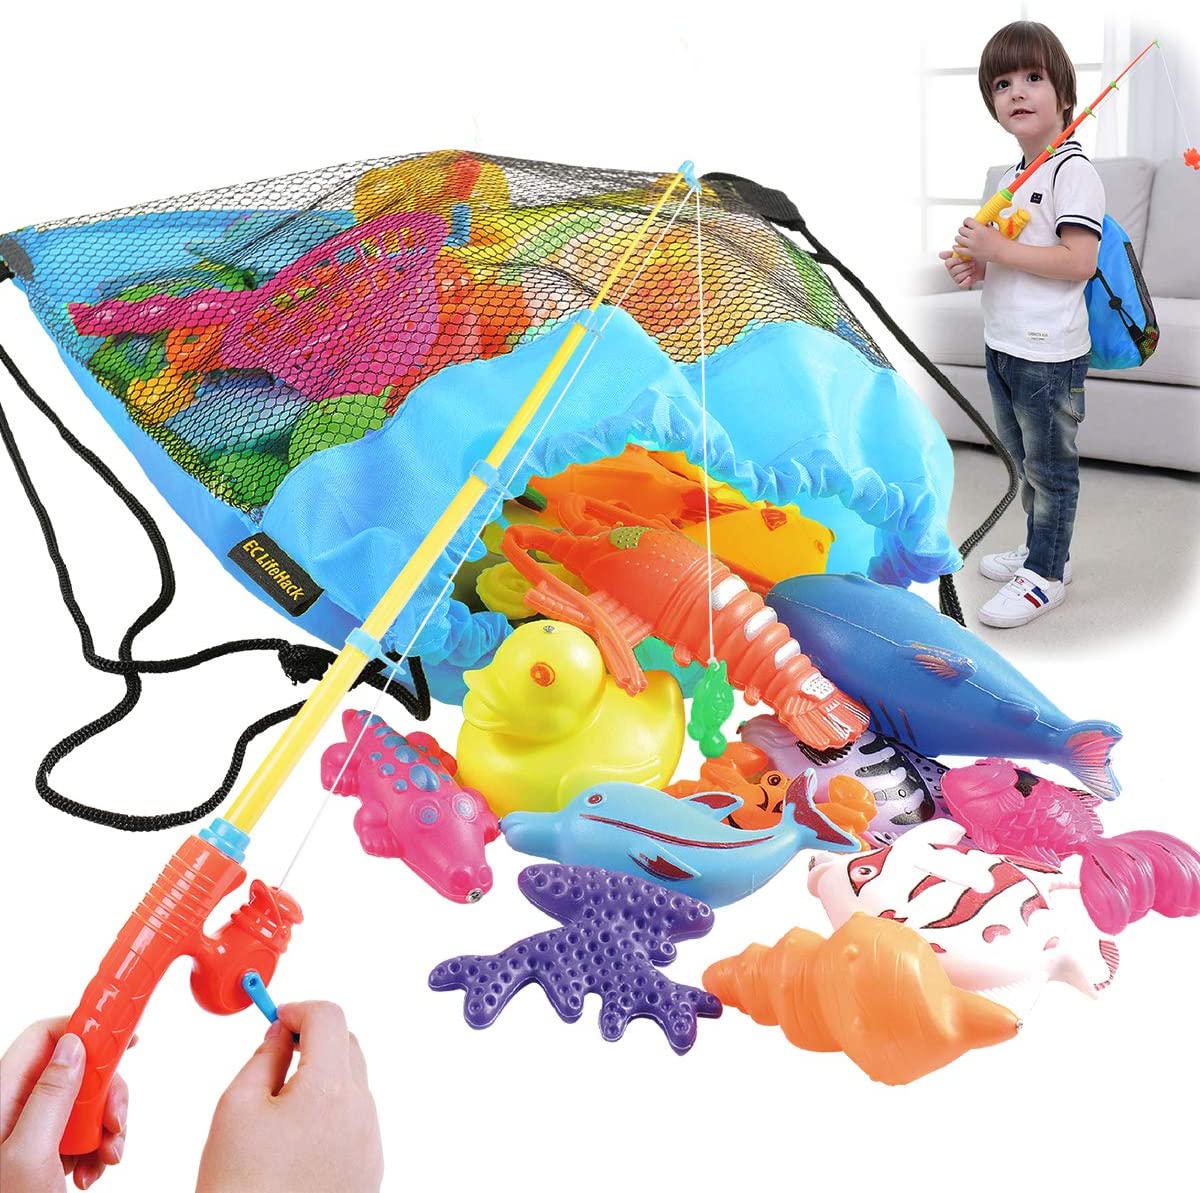 Cozybomb Fishing Pool Toys Game for Kids Water Table Bathtub Age 3to 6 for sale online 